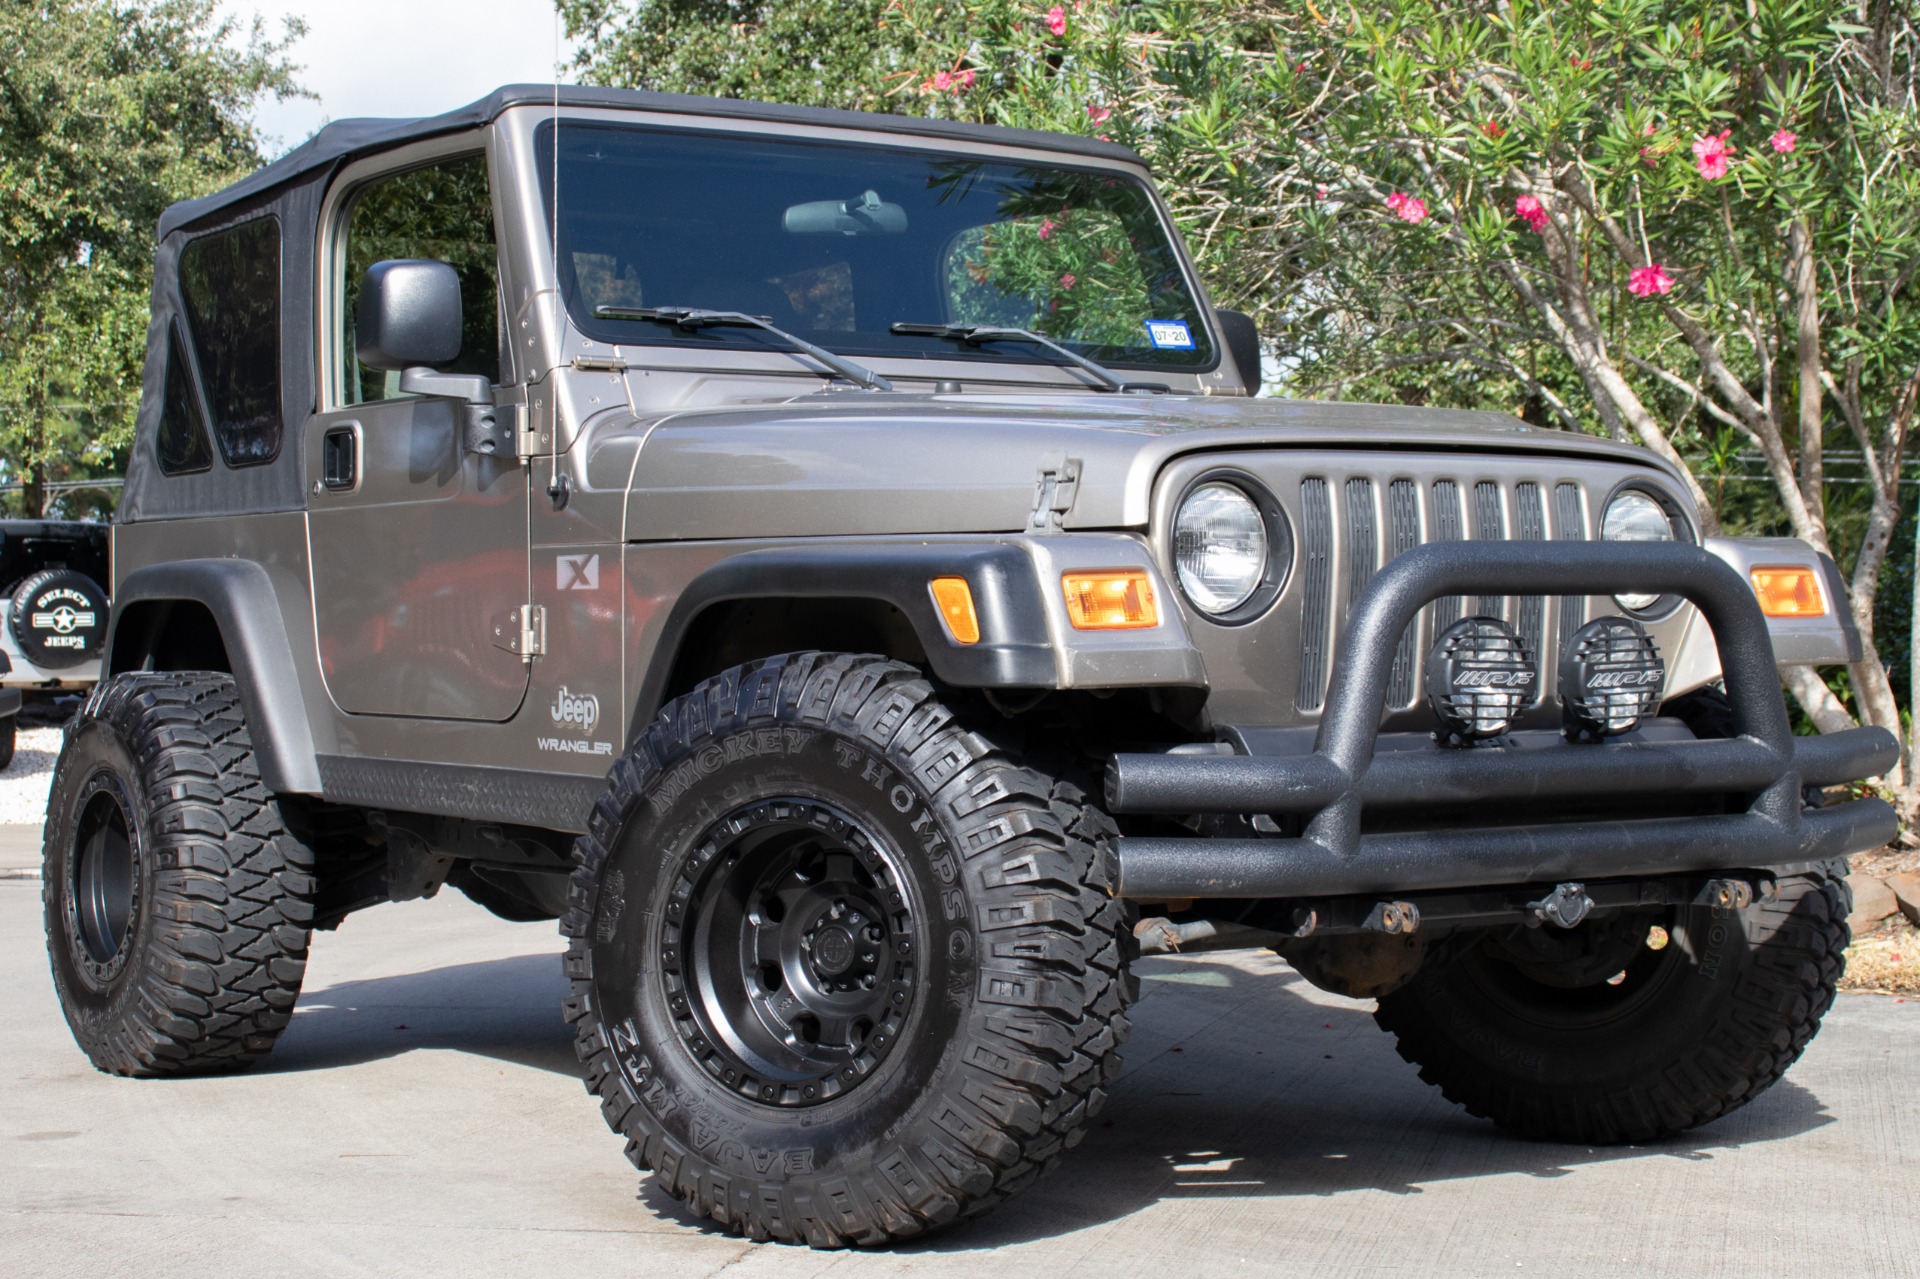 Used 2006 Jeep Wrangler X For Sale ($18,995) | Select Jeeps Inc. Stock  #708488